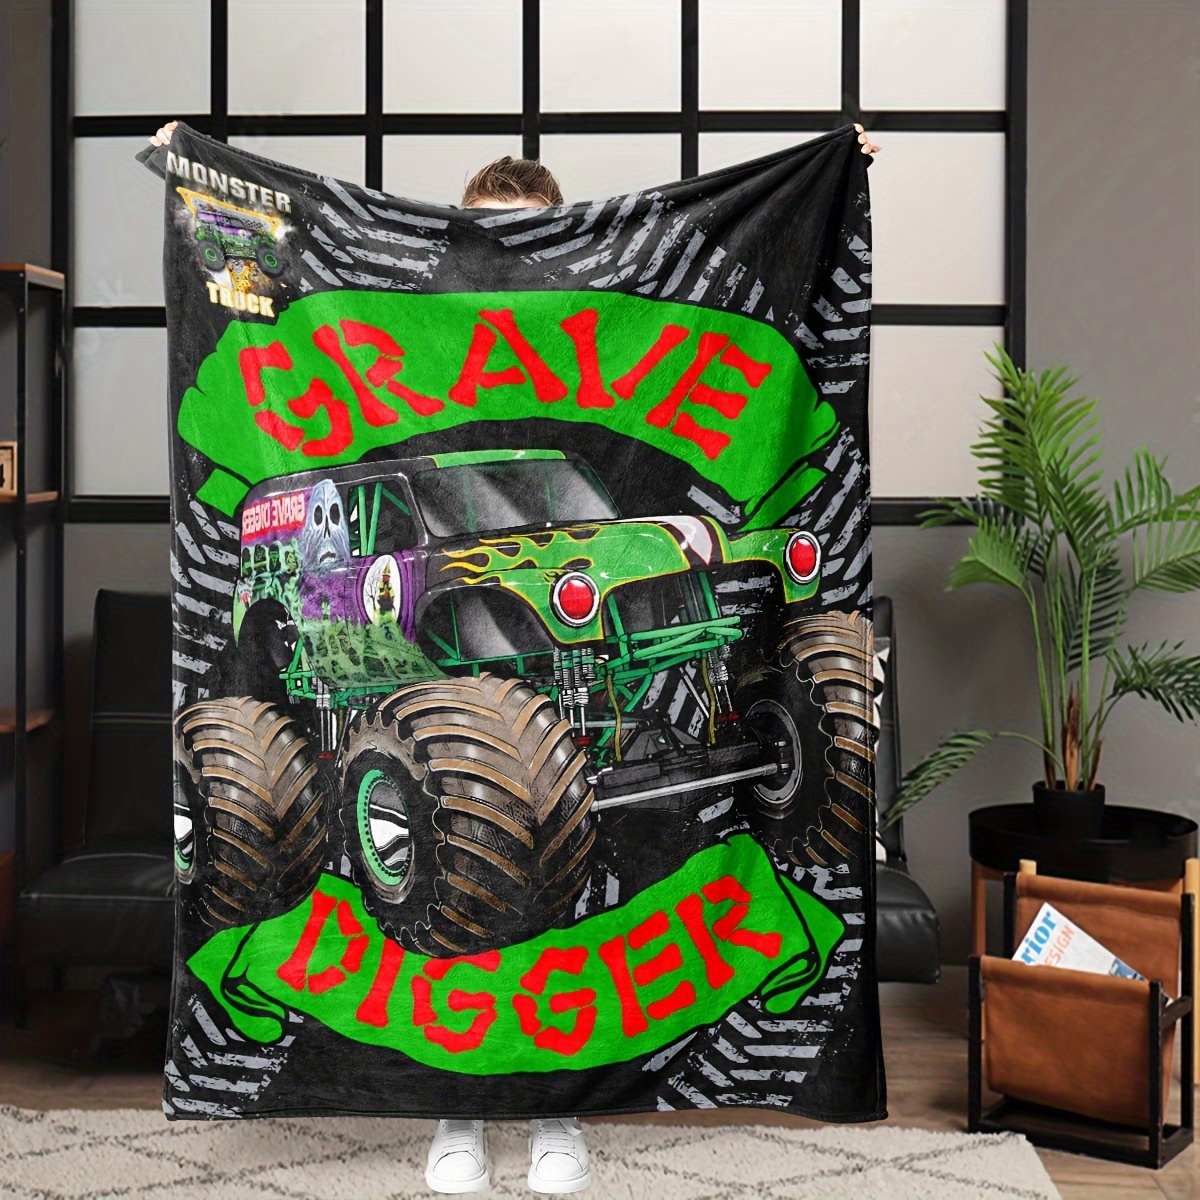 

Monster Truck Flannel Throw Blanket - Contemporary Anime Style, All-season Warm Lightweight Multipurpose, Machine Washable, Knitted Polyester, Printed Pattern With Unique Embellishments